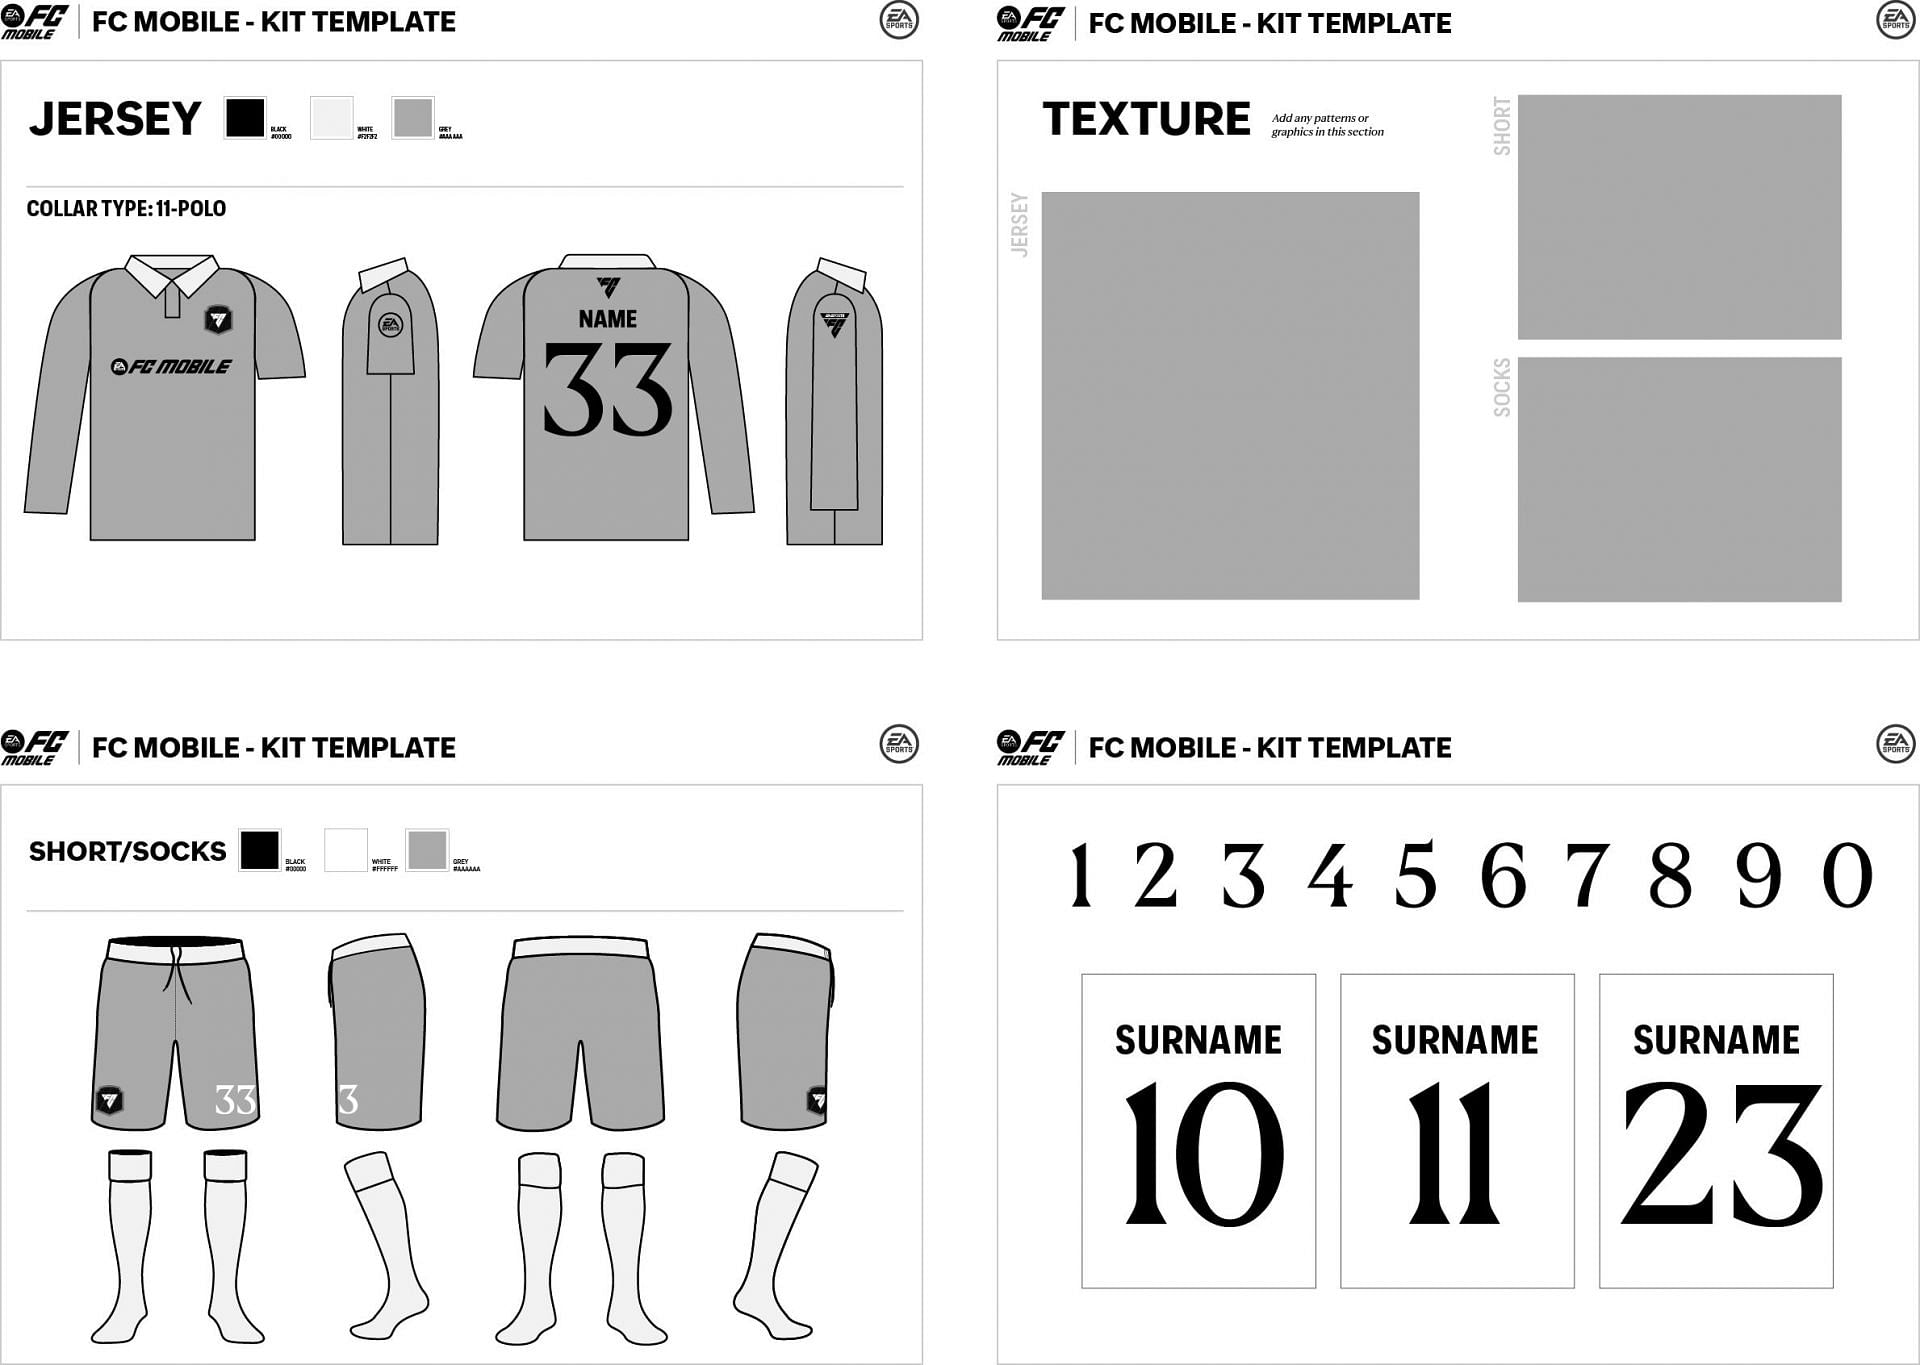 The kit template is available on the official FC Mobile website to download (Image via EA Sports)